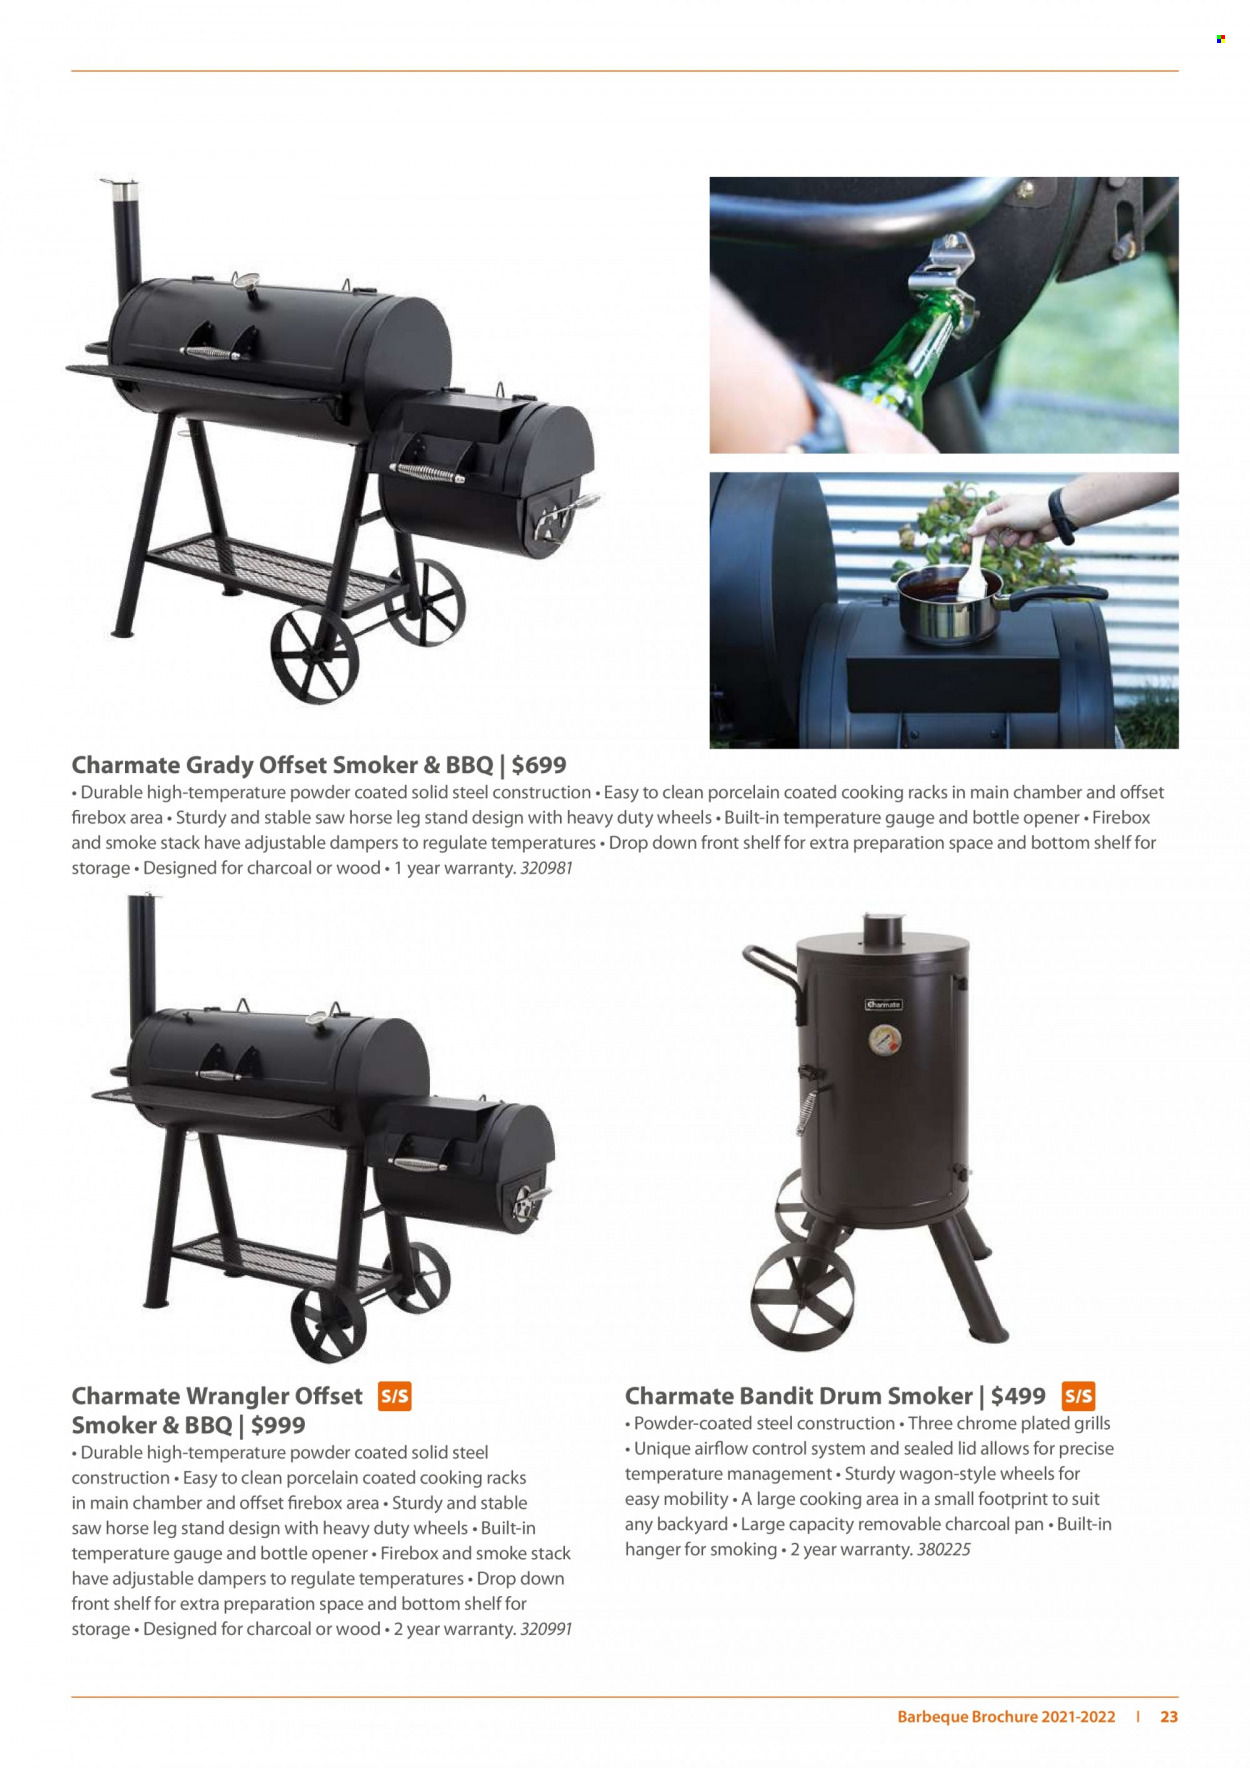 Mitre 10 mailer . Page 23.